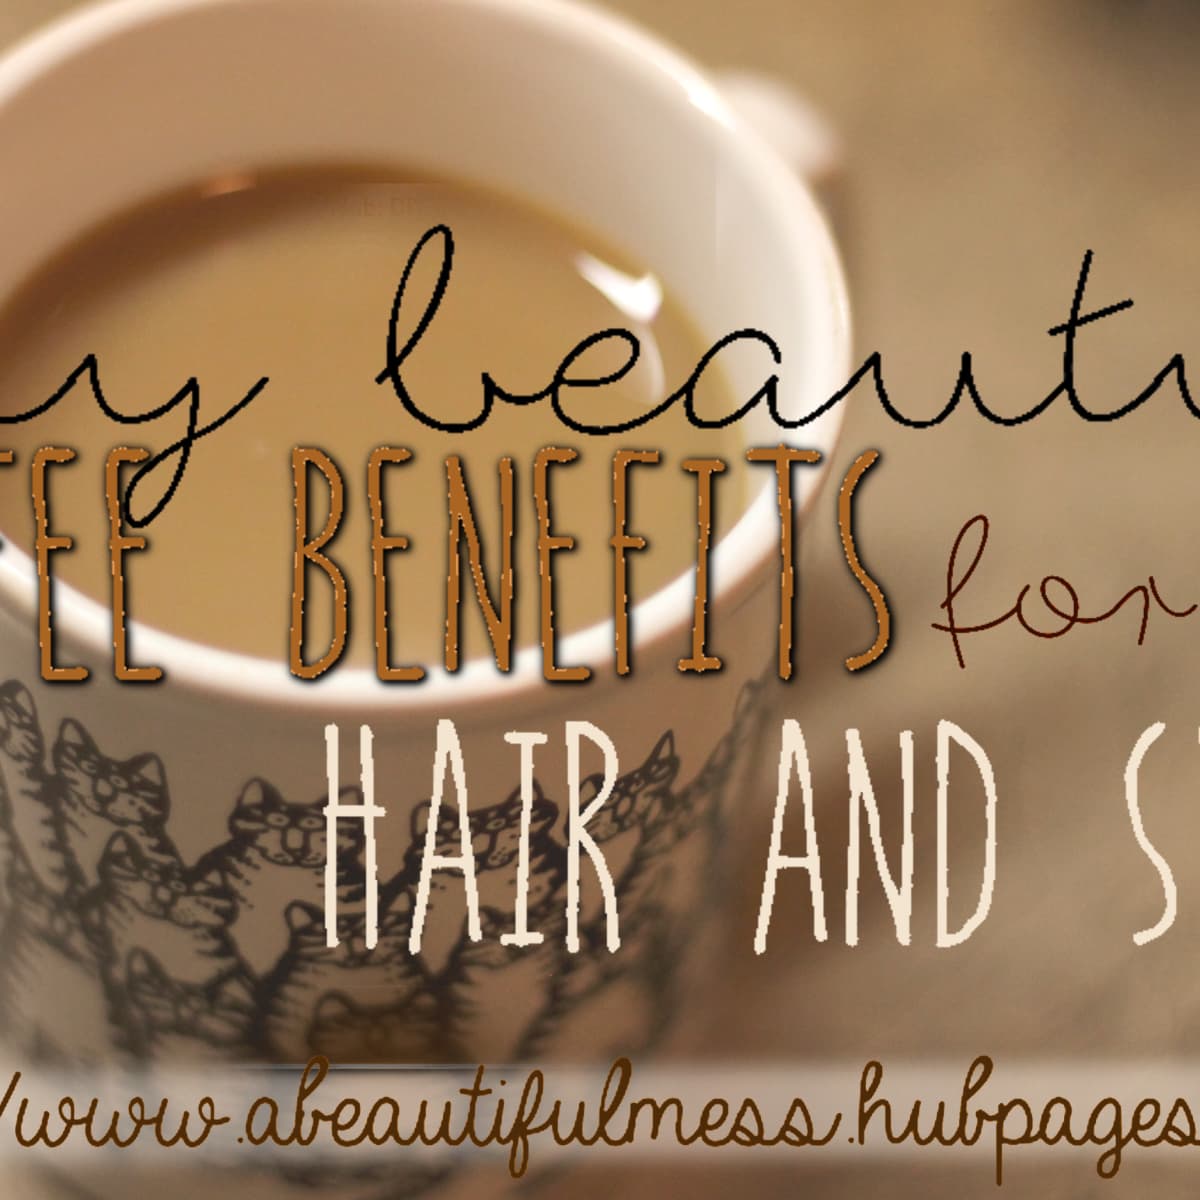 DIY Beauty: Coffee Benefits for Hair and Skin - HubPages